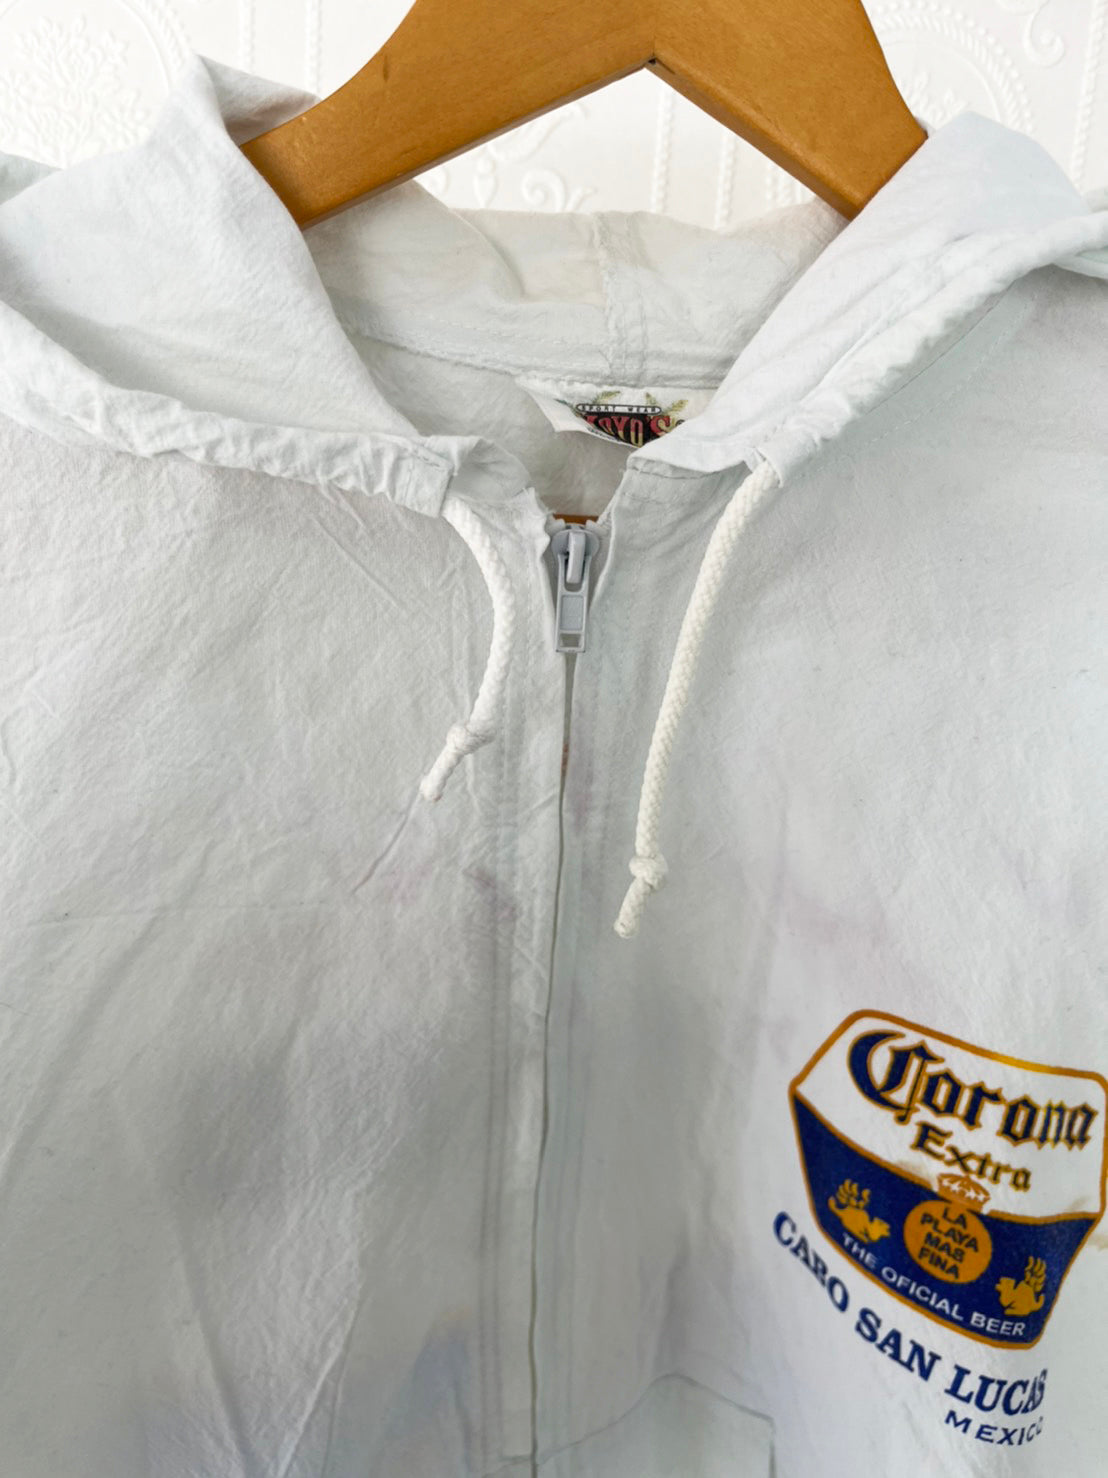 【vintage】90's CORONA Extra THE Official Beer  cotton foodie コロナエクストラ 薄手コットン ビーチパーカー (men's XL)